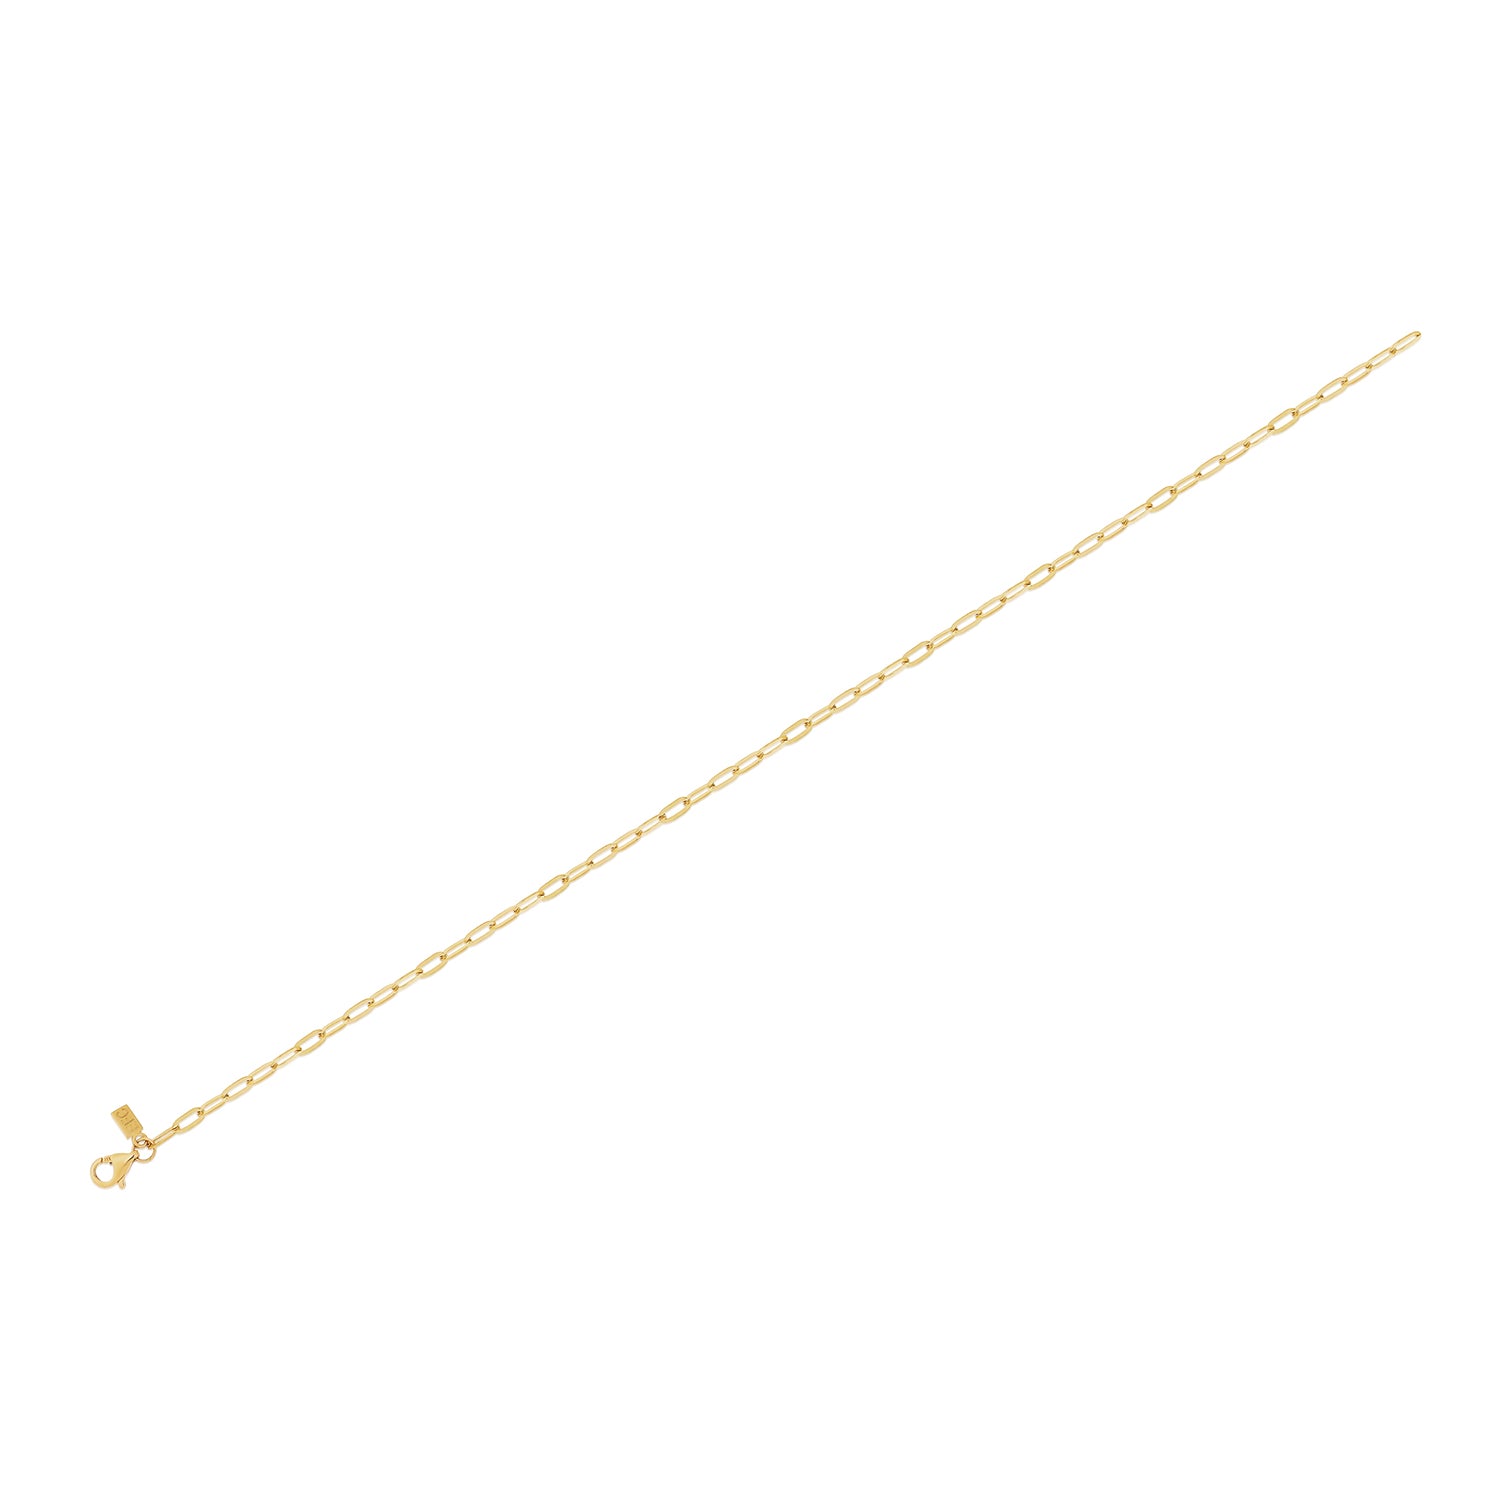 Mini Link Anklet in 14k yellow gold